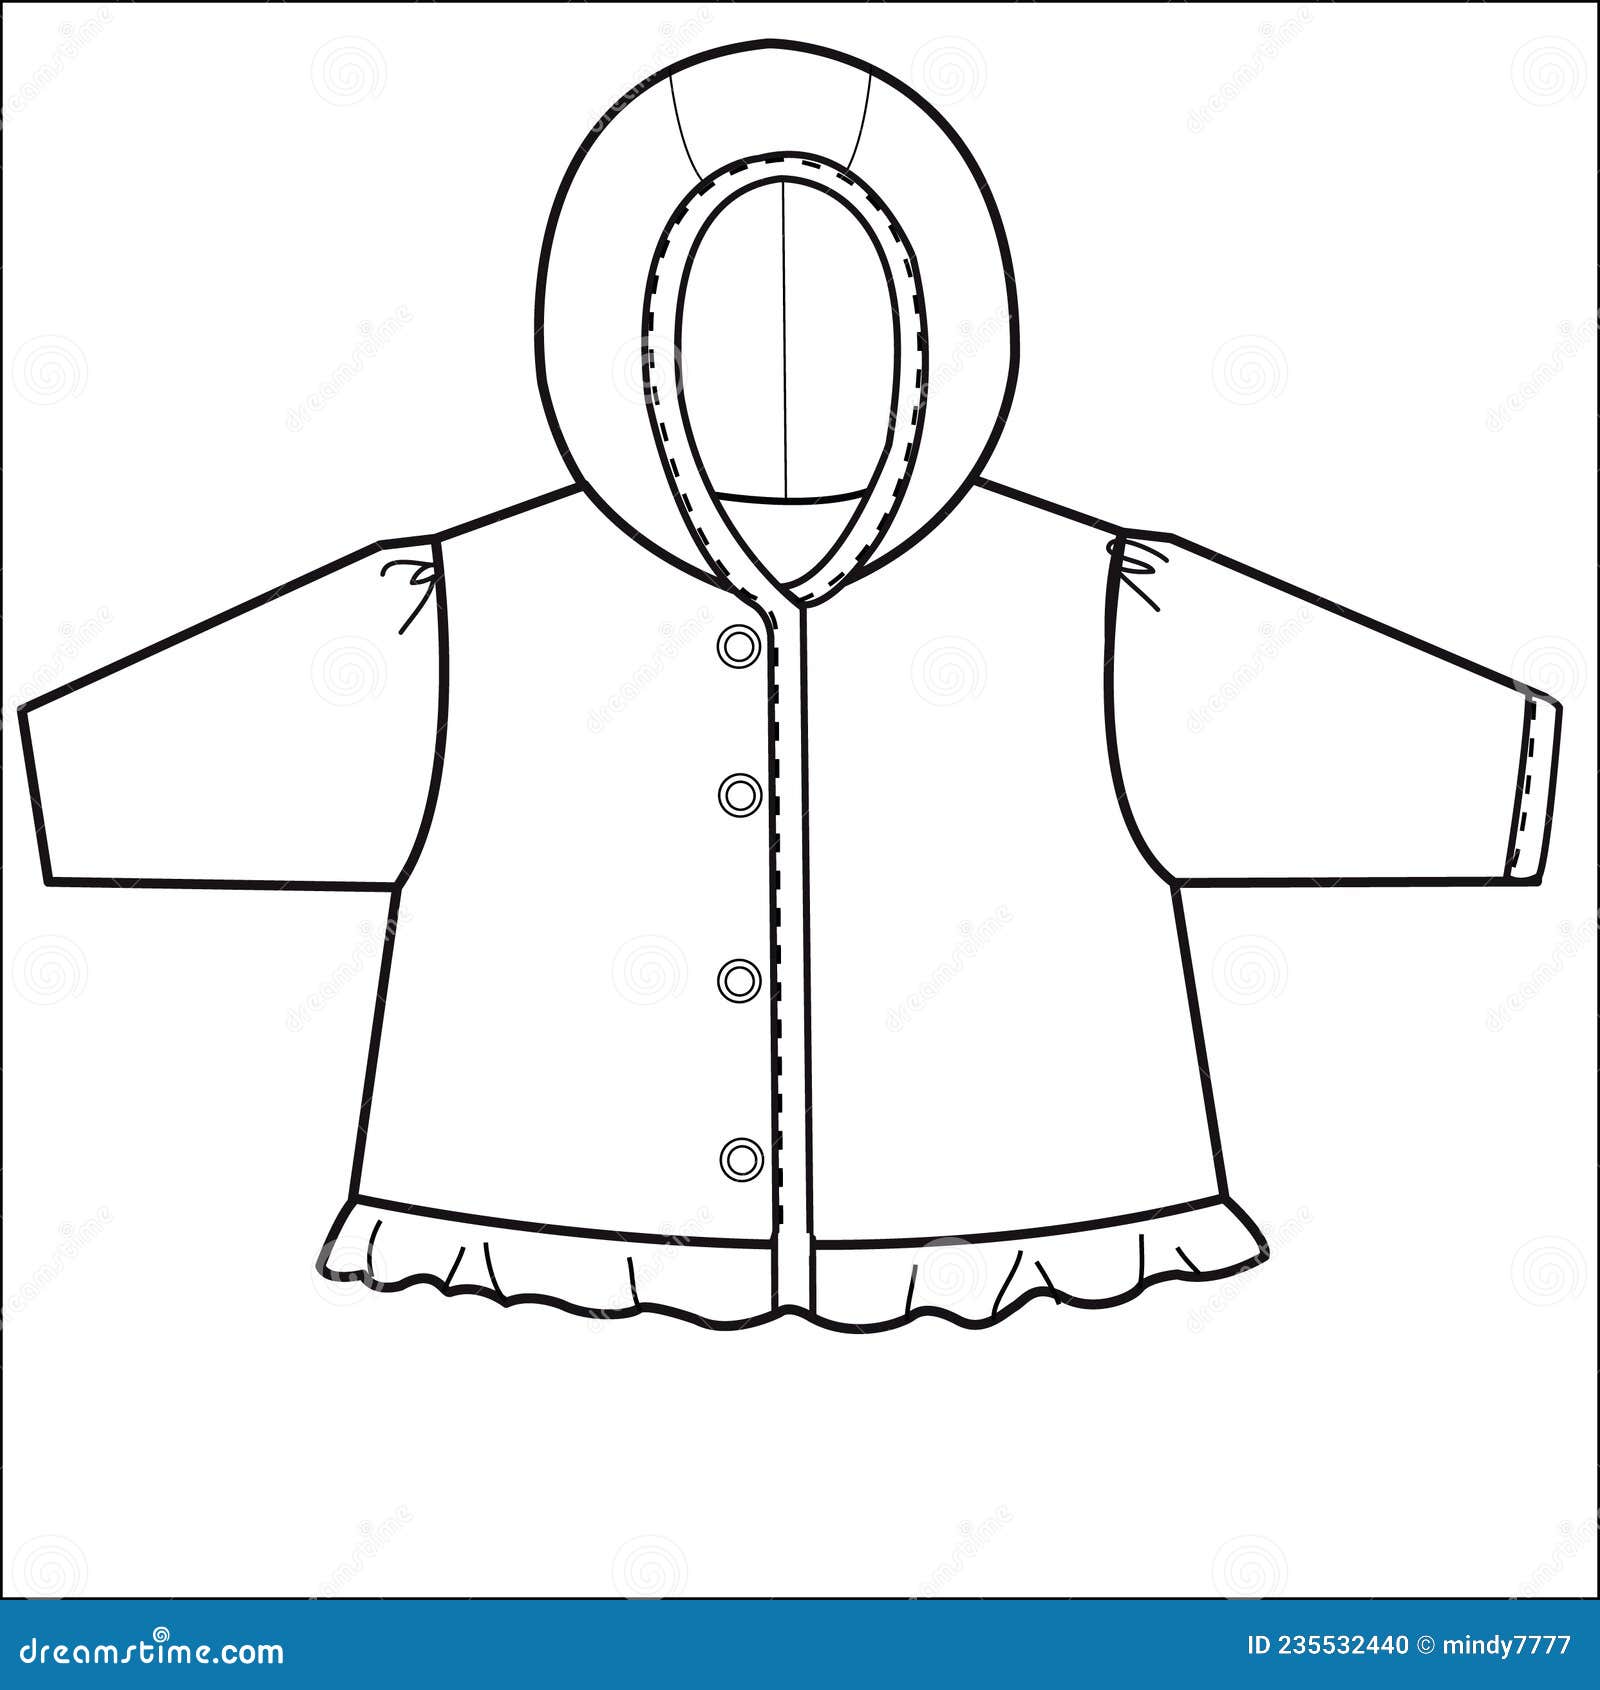 Baby Clothing Design Template. Flat Sketches Stock Vector ...